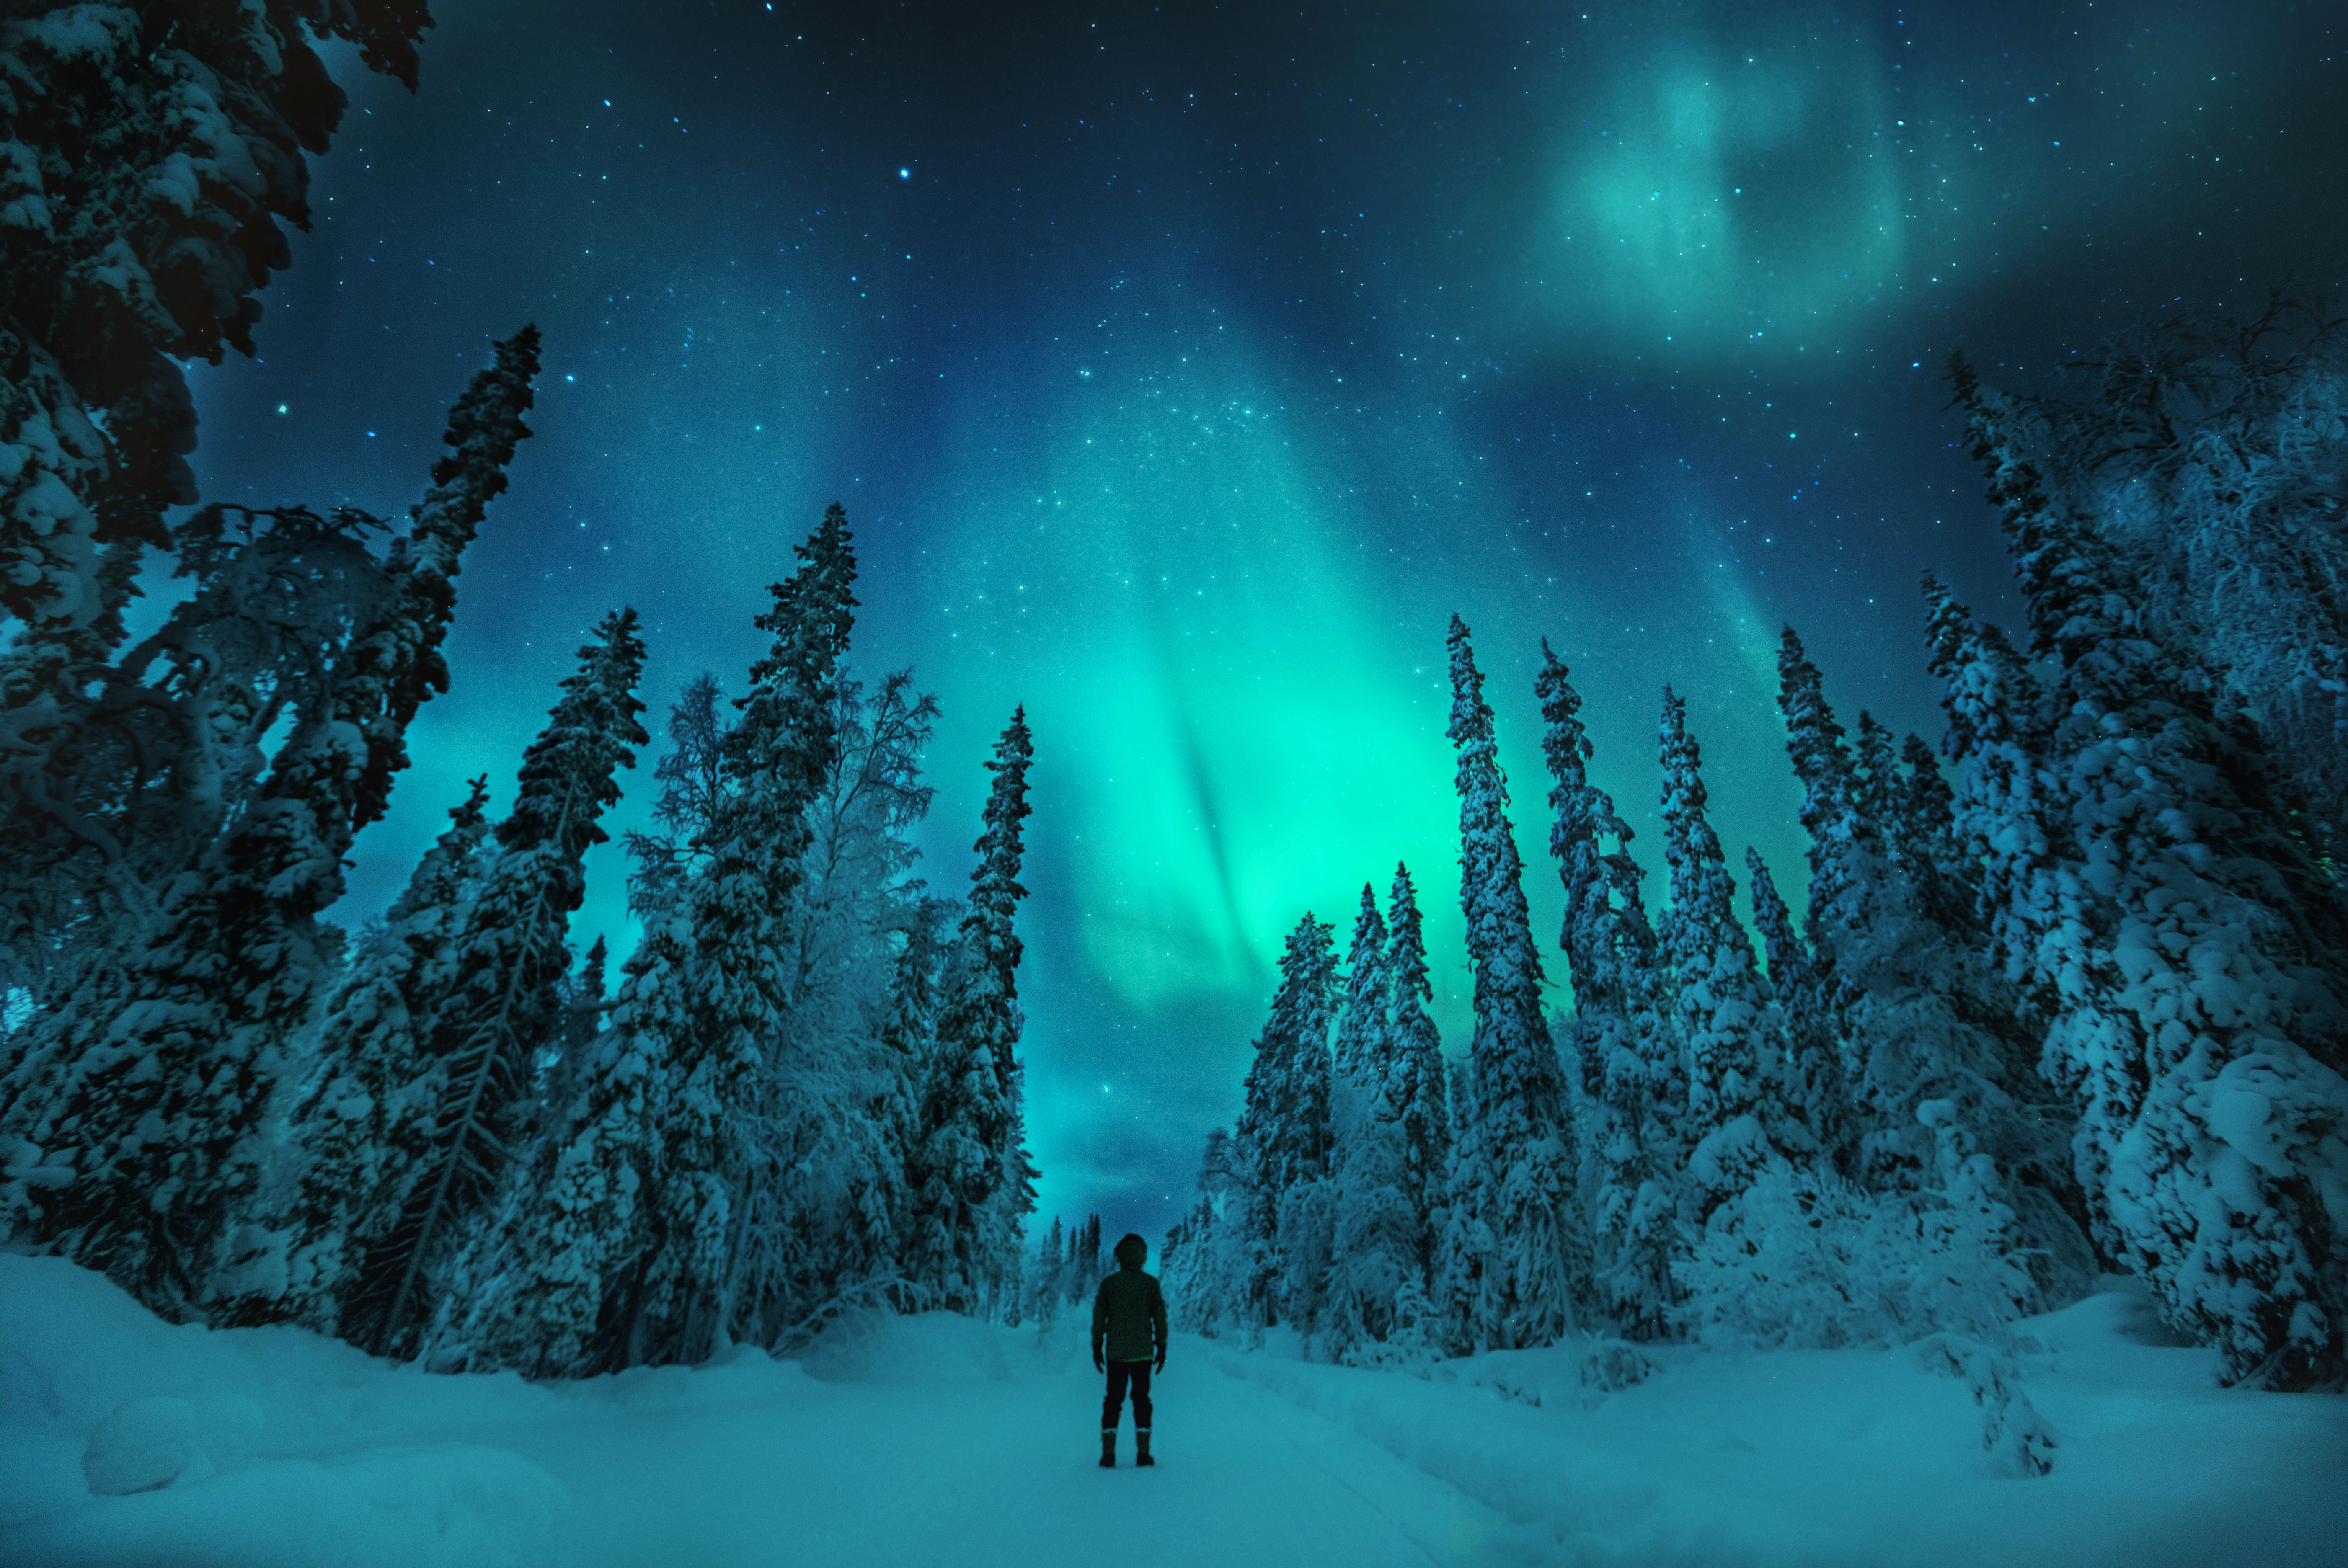 A lone person with their back to the camera stands in the snowy woods looking up at the Northern Lights.